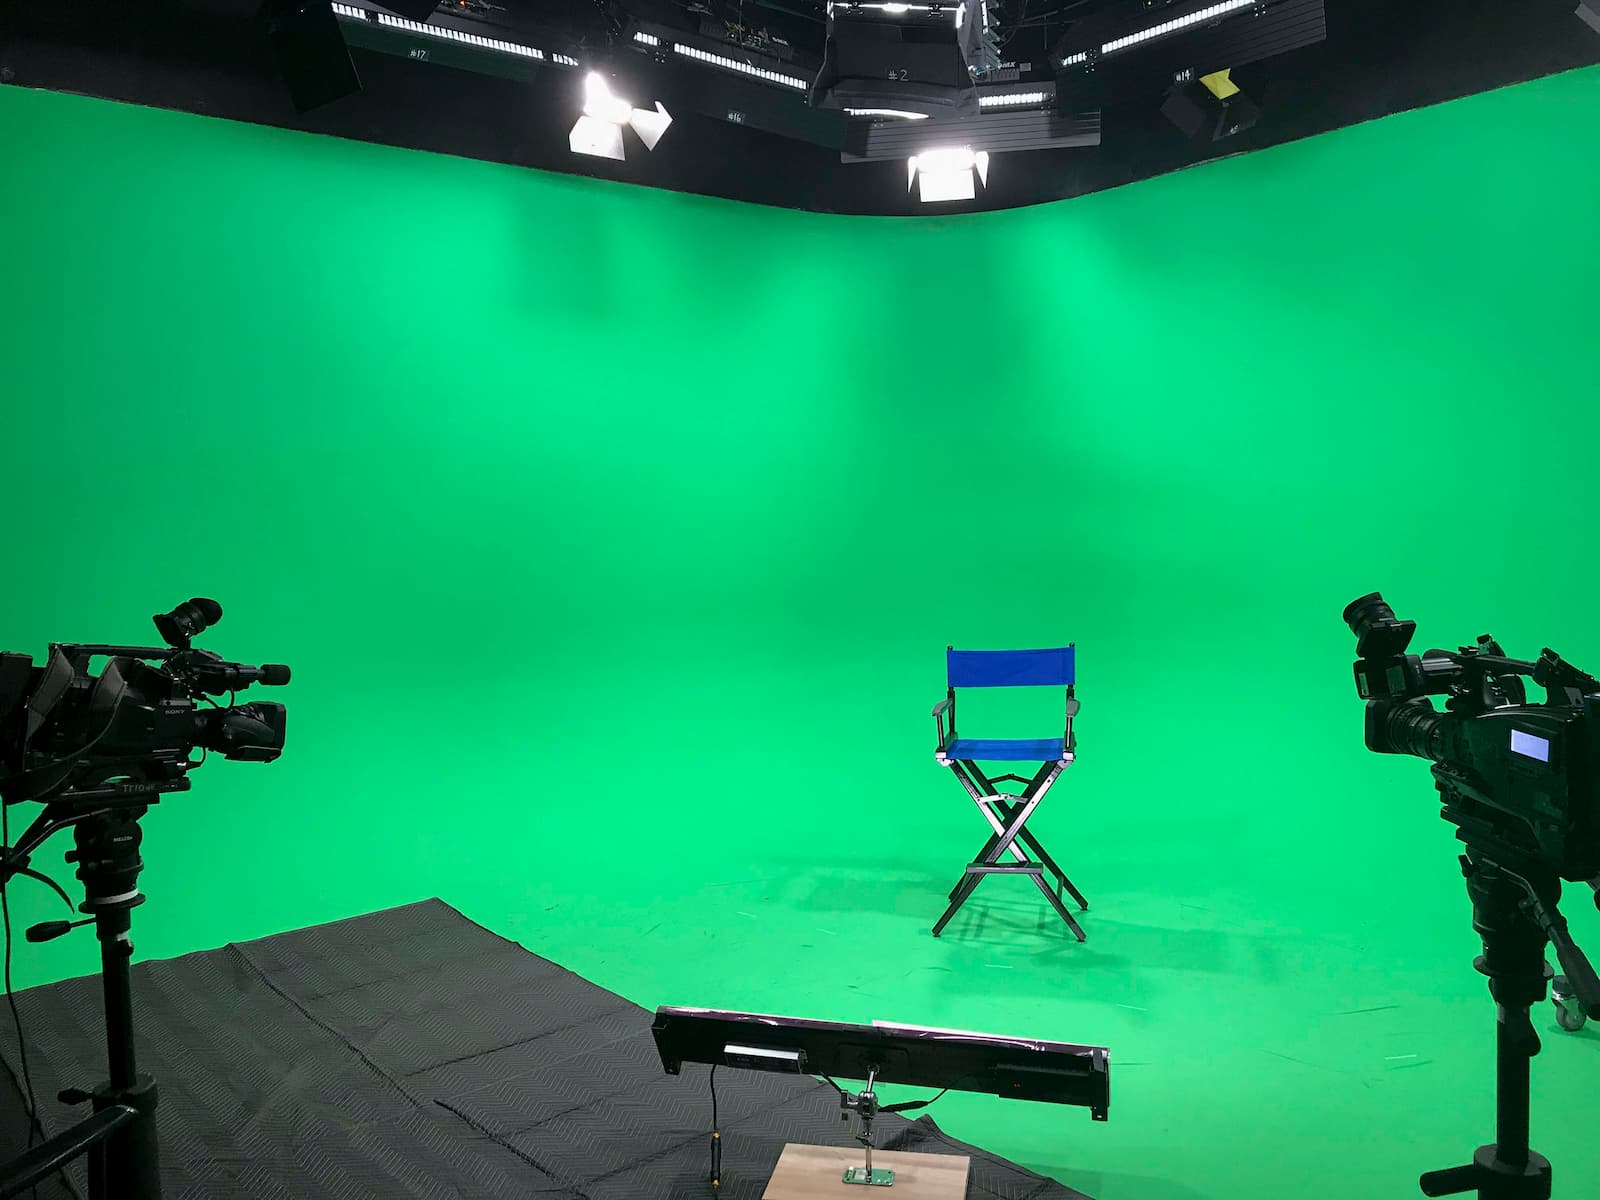 Photo of a director's chair in the middle of our TV stage with camera equipment on both sides